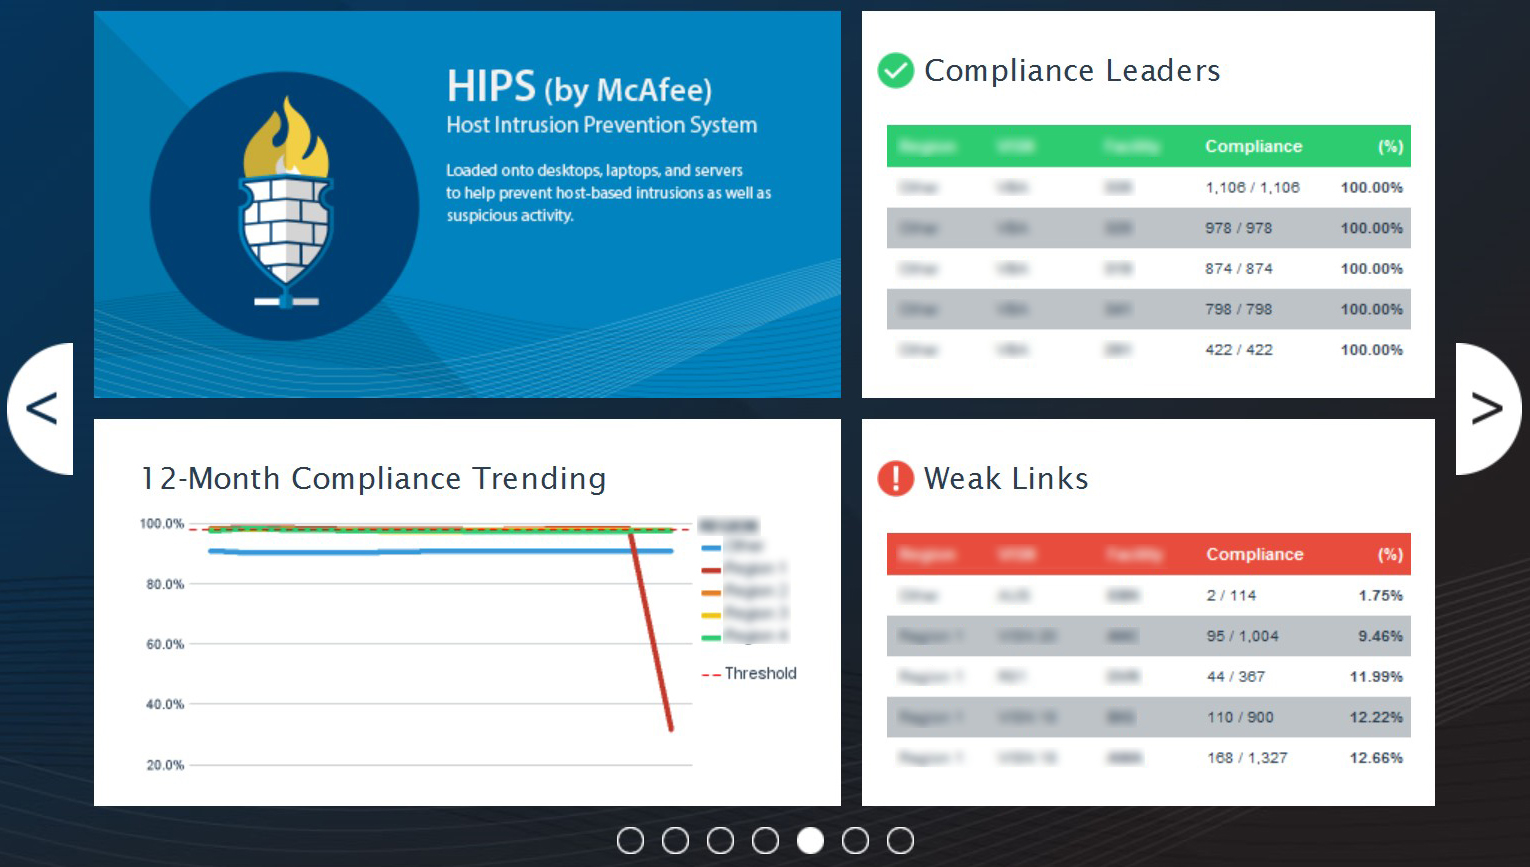 HIPS Compliance status image in carousel